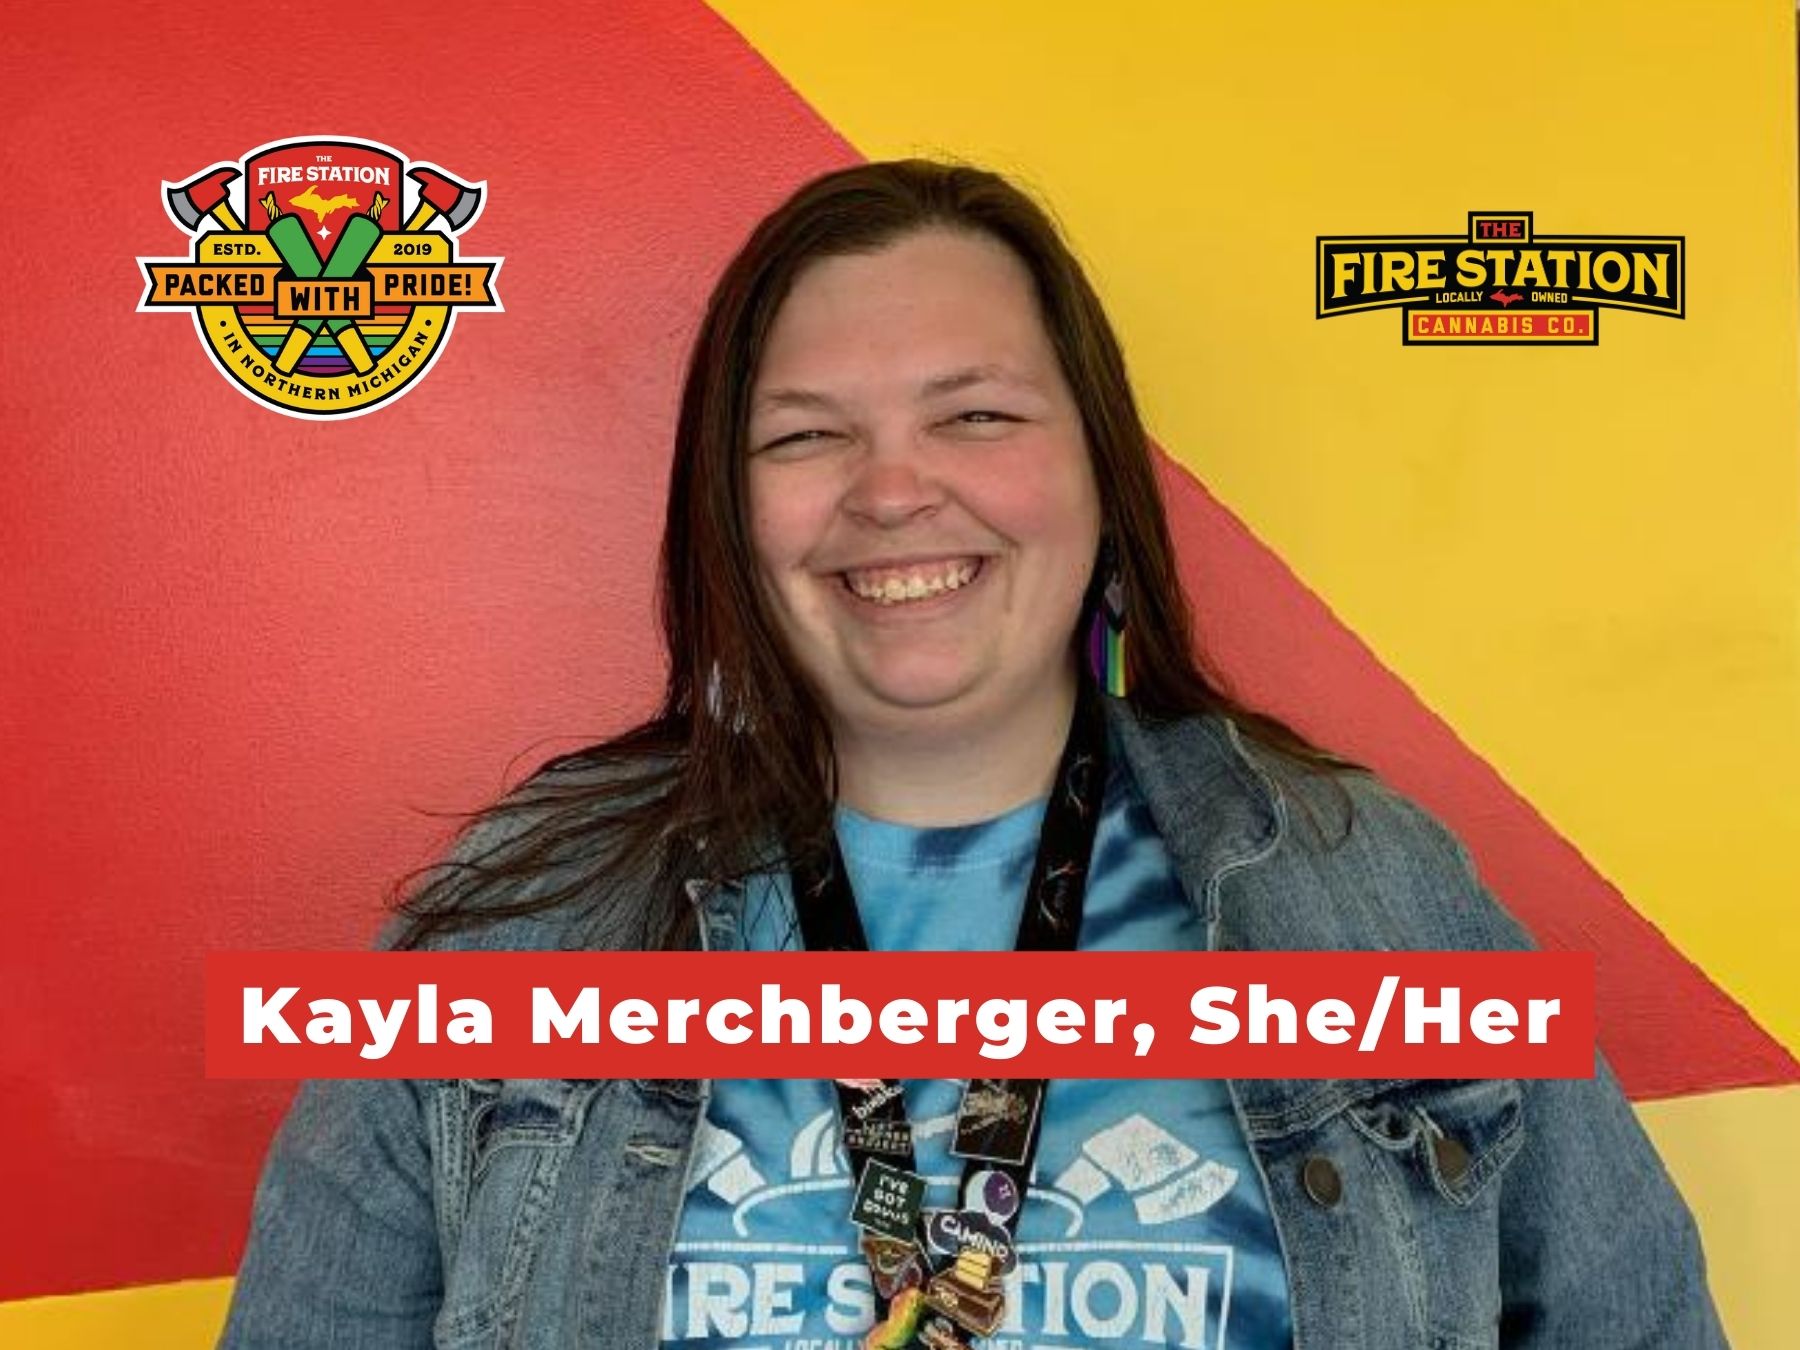 The Fire Station celebrates Pride Month and features Kayla Merchberger She/Her, Lead Budtender at The Fire Station in Sault Ste. Marie, Michigan.